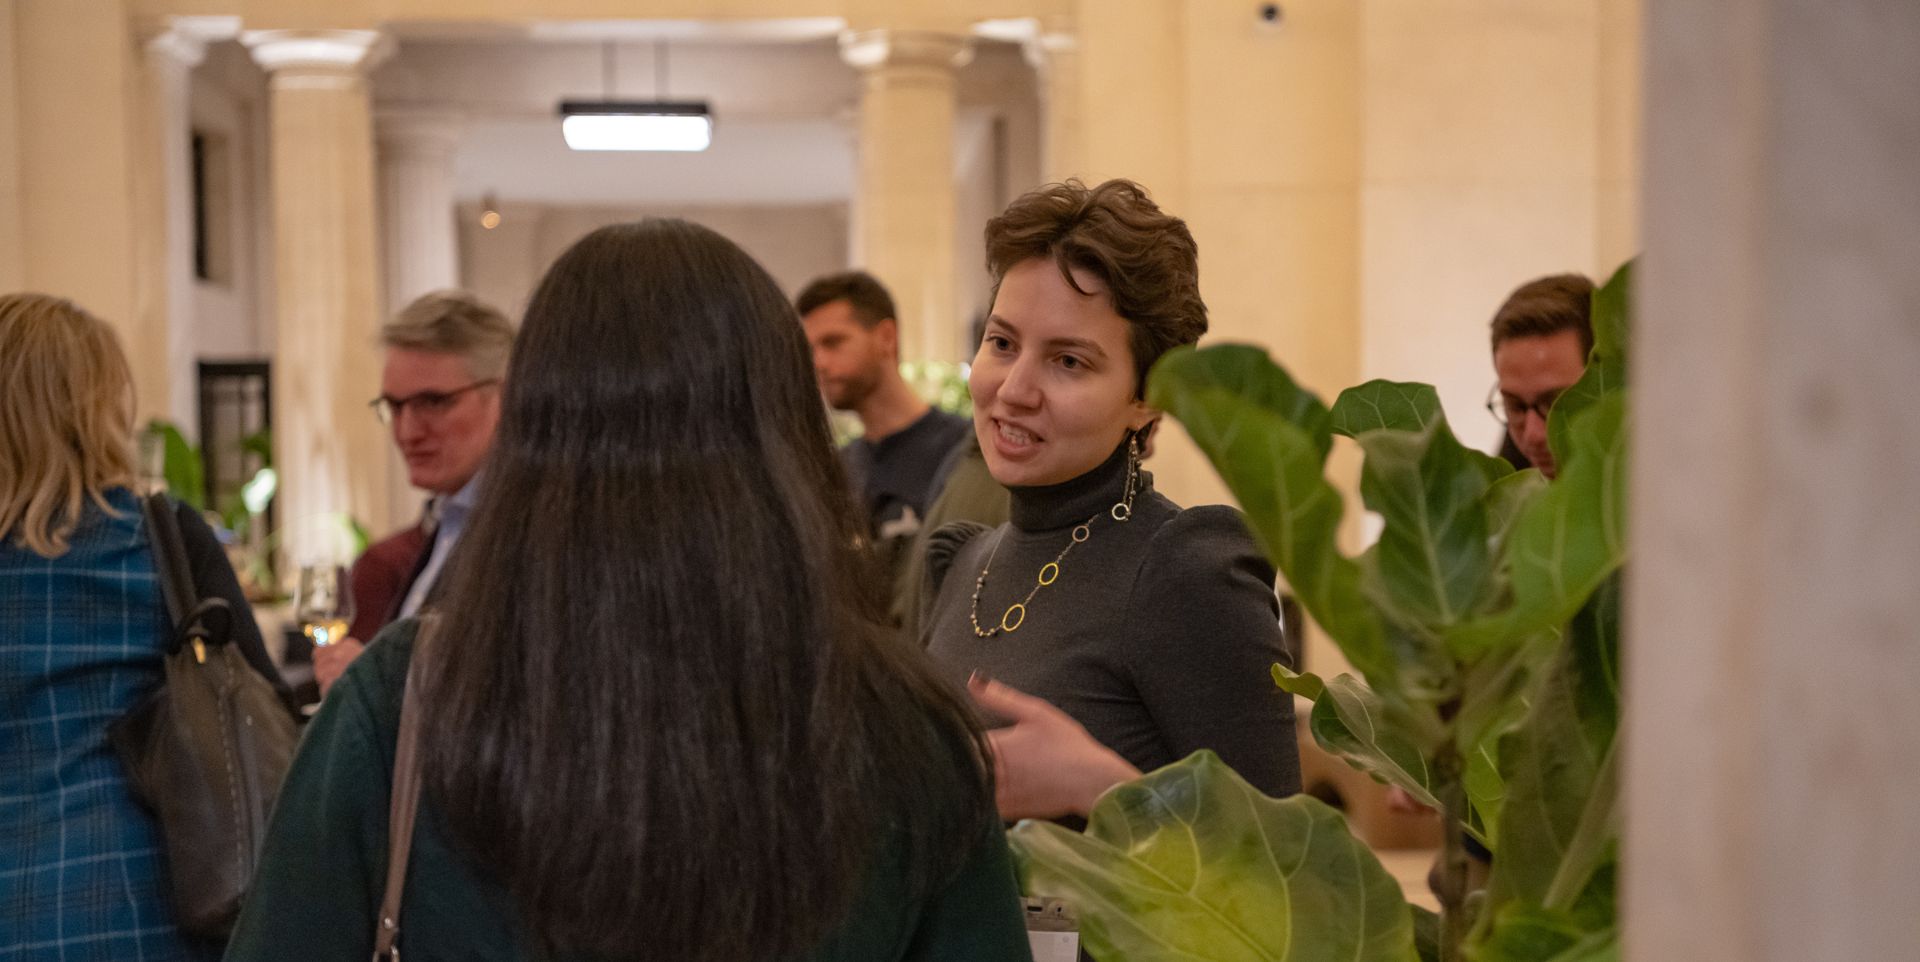 Life sciences networking at Pioner Group - image of a woman with short brown hair chatting with another woman at a networking event at Victoria House.